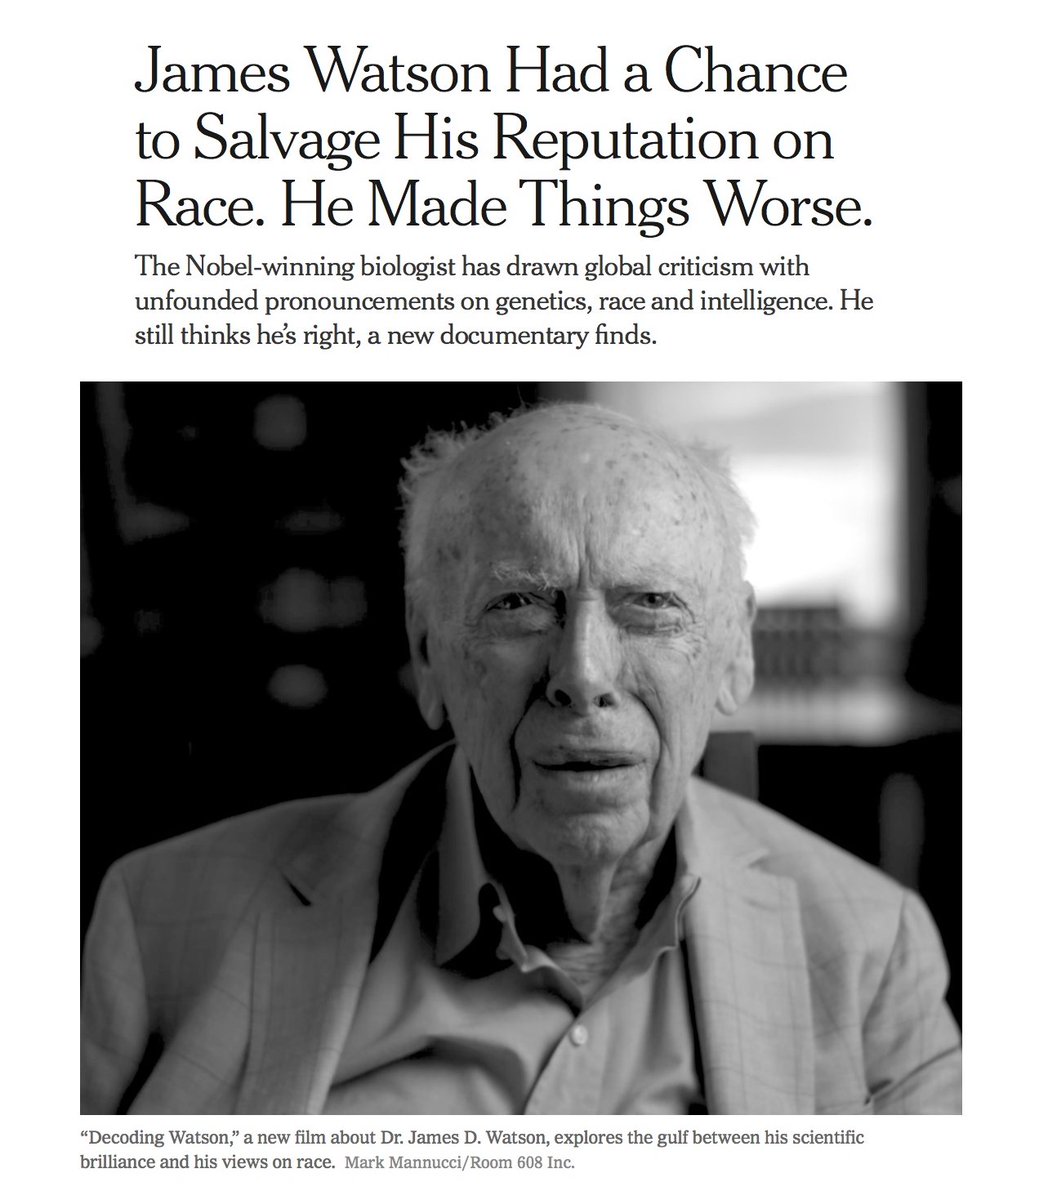 A Decade Ago, James D. Watson, Founder Of Modern Genetics And One Of The Most Influential Scientists Of The 20th Century, Landed In A 'Professional Exile' By Suggesting That Black People Are Intrinsically Less Intelligent Than Whites. https://www.nytimes.com/2019/01/01/science/watson-dna-genetics-race.html?module=inline #QAnon  @potus